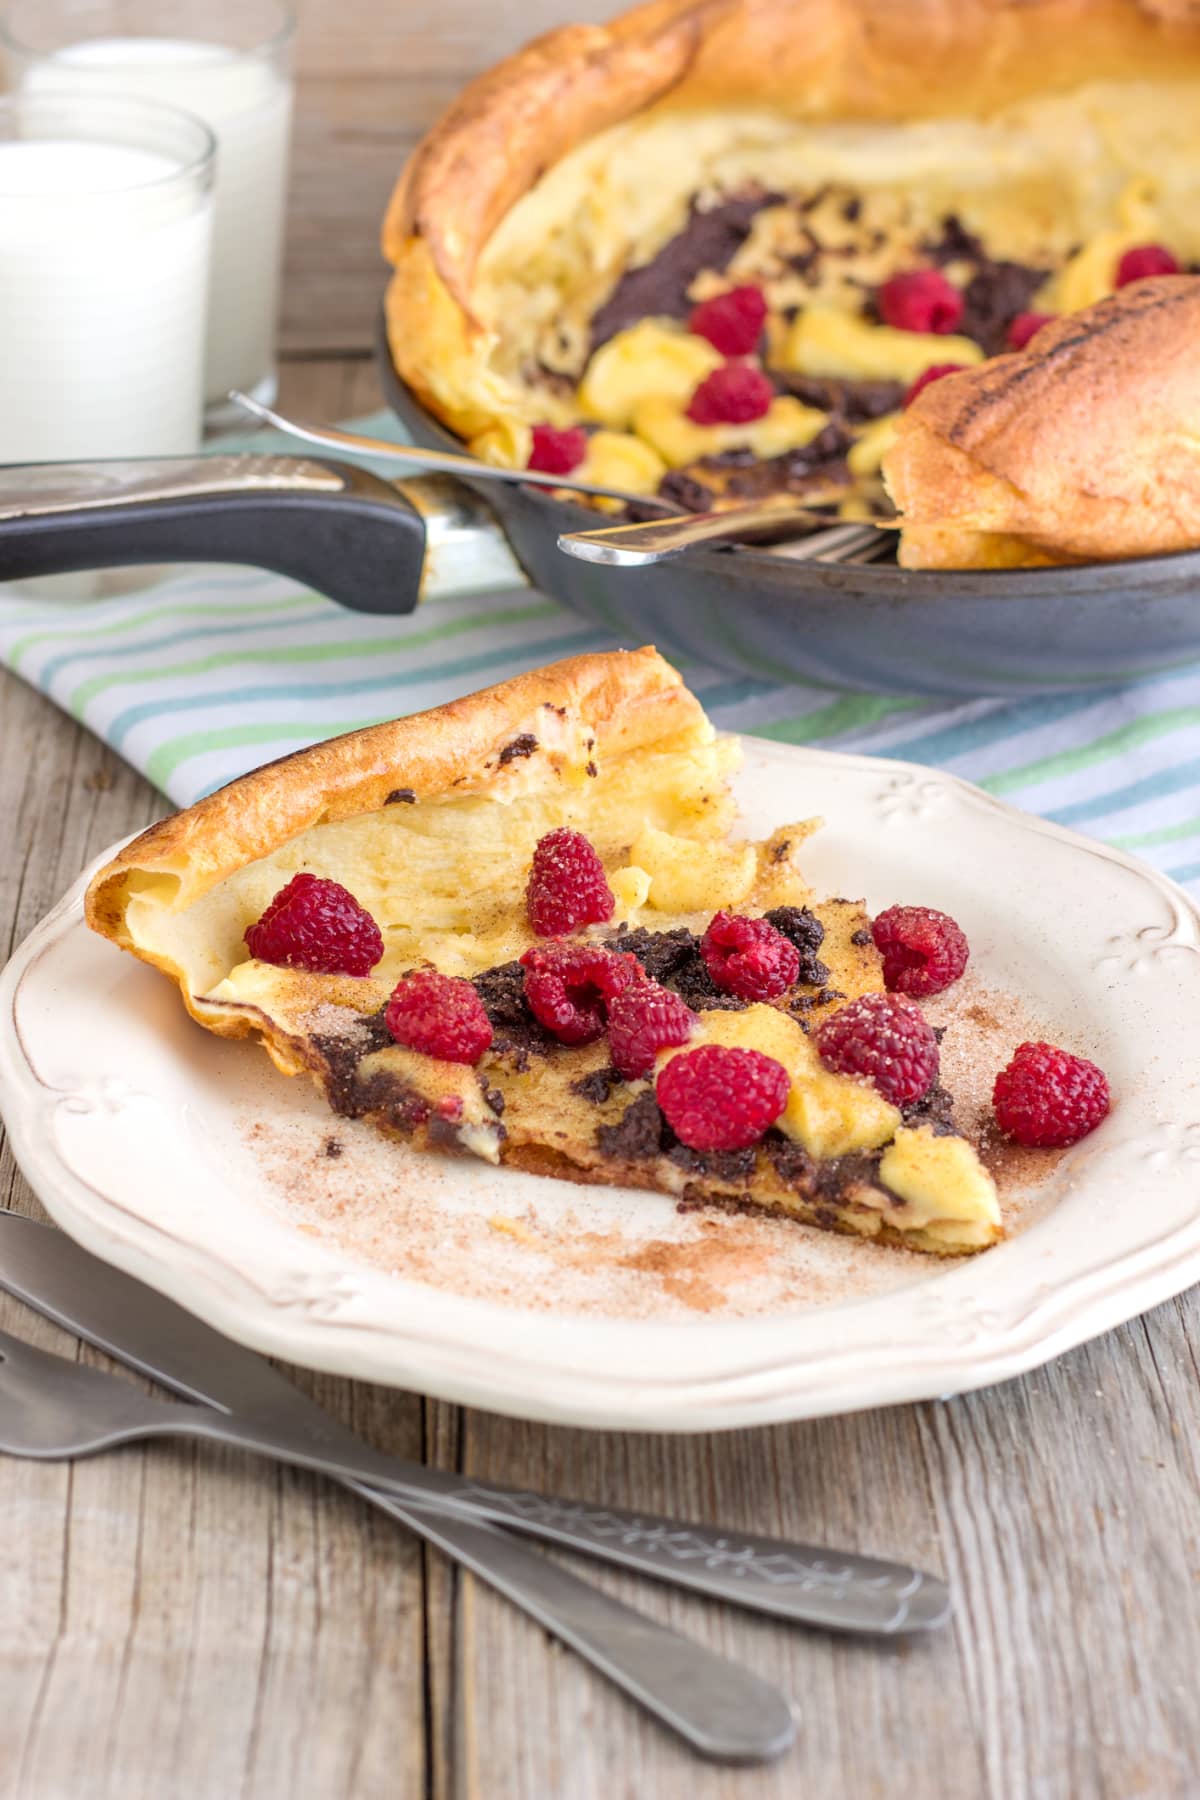 Slice of Dutch baby topped with raspberries on plate